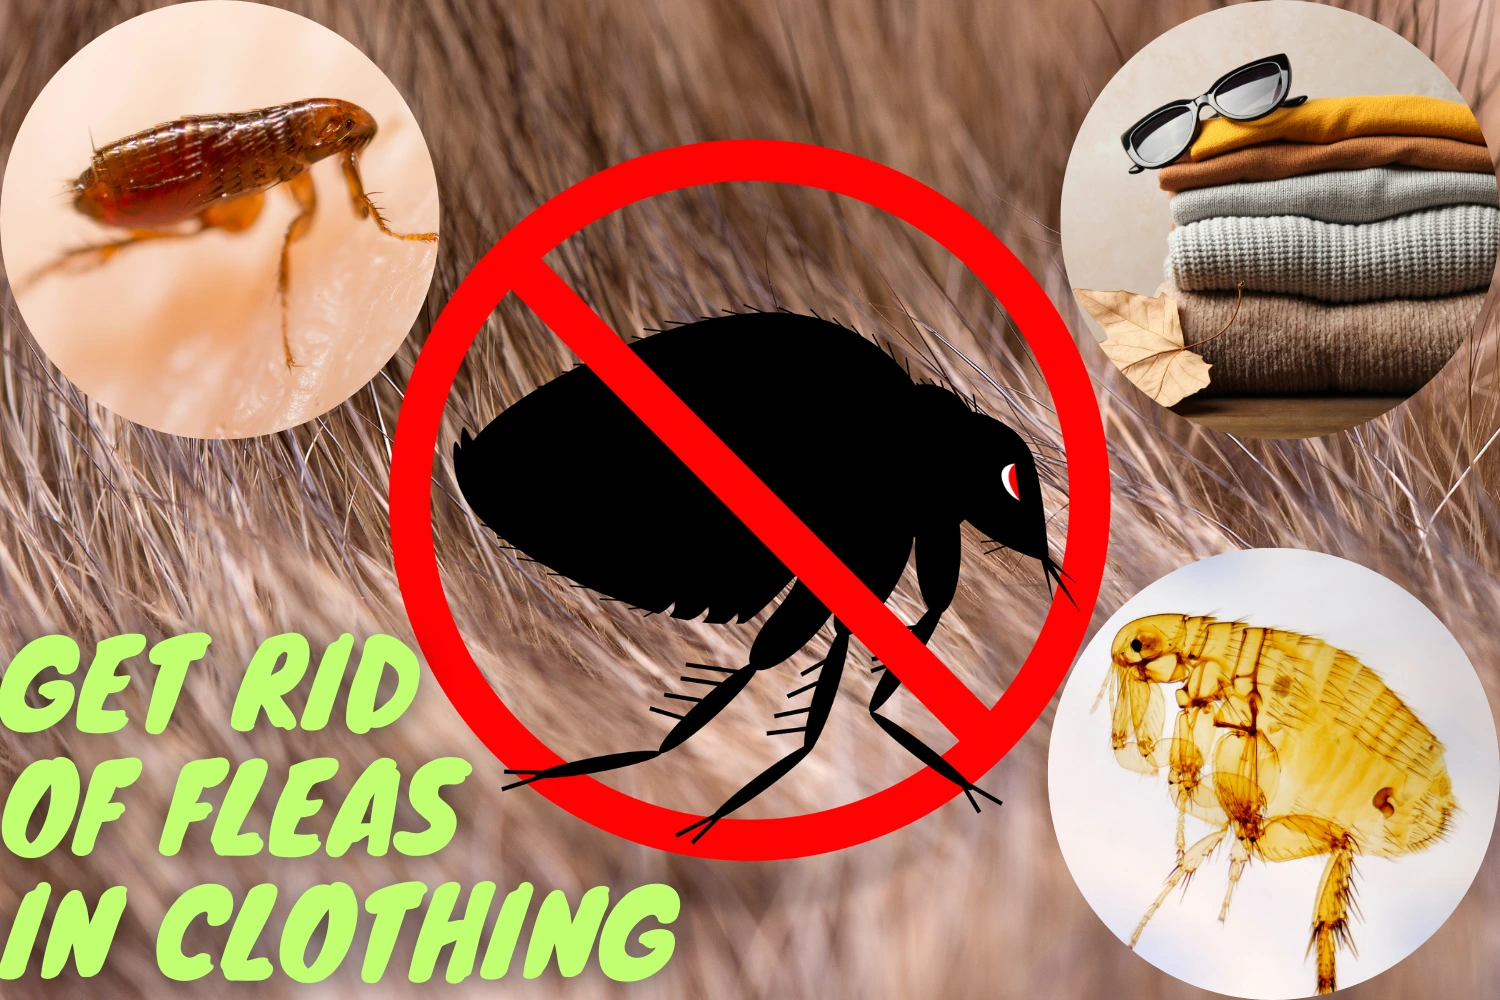 how to get rid of fleas on clothes